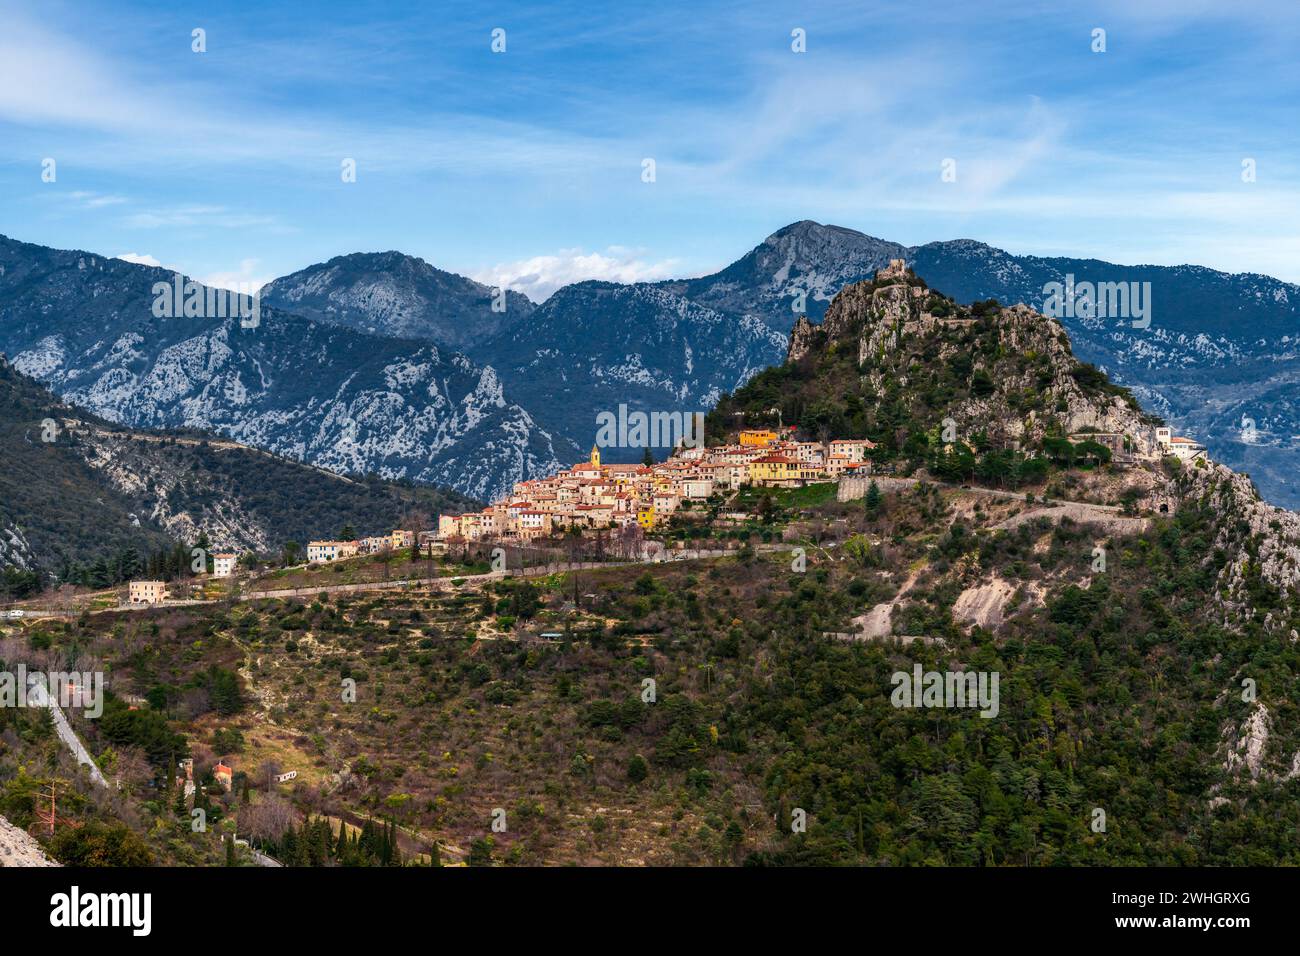 Landscape view of the idyllic coastal mountain village of Sainte-Agnes in the Alpes-Maritime region of the Cote d'Azur in southe Stock Photo